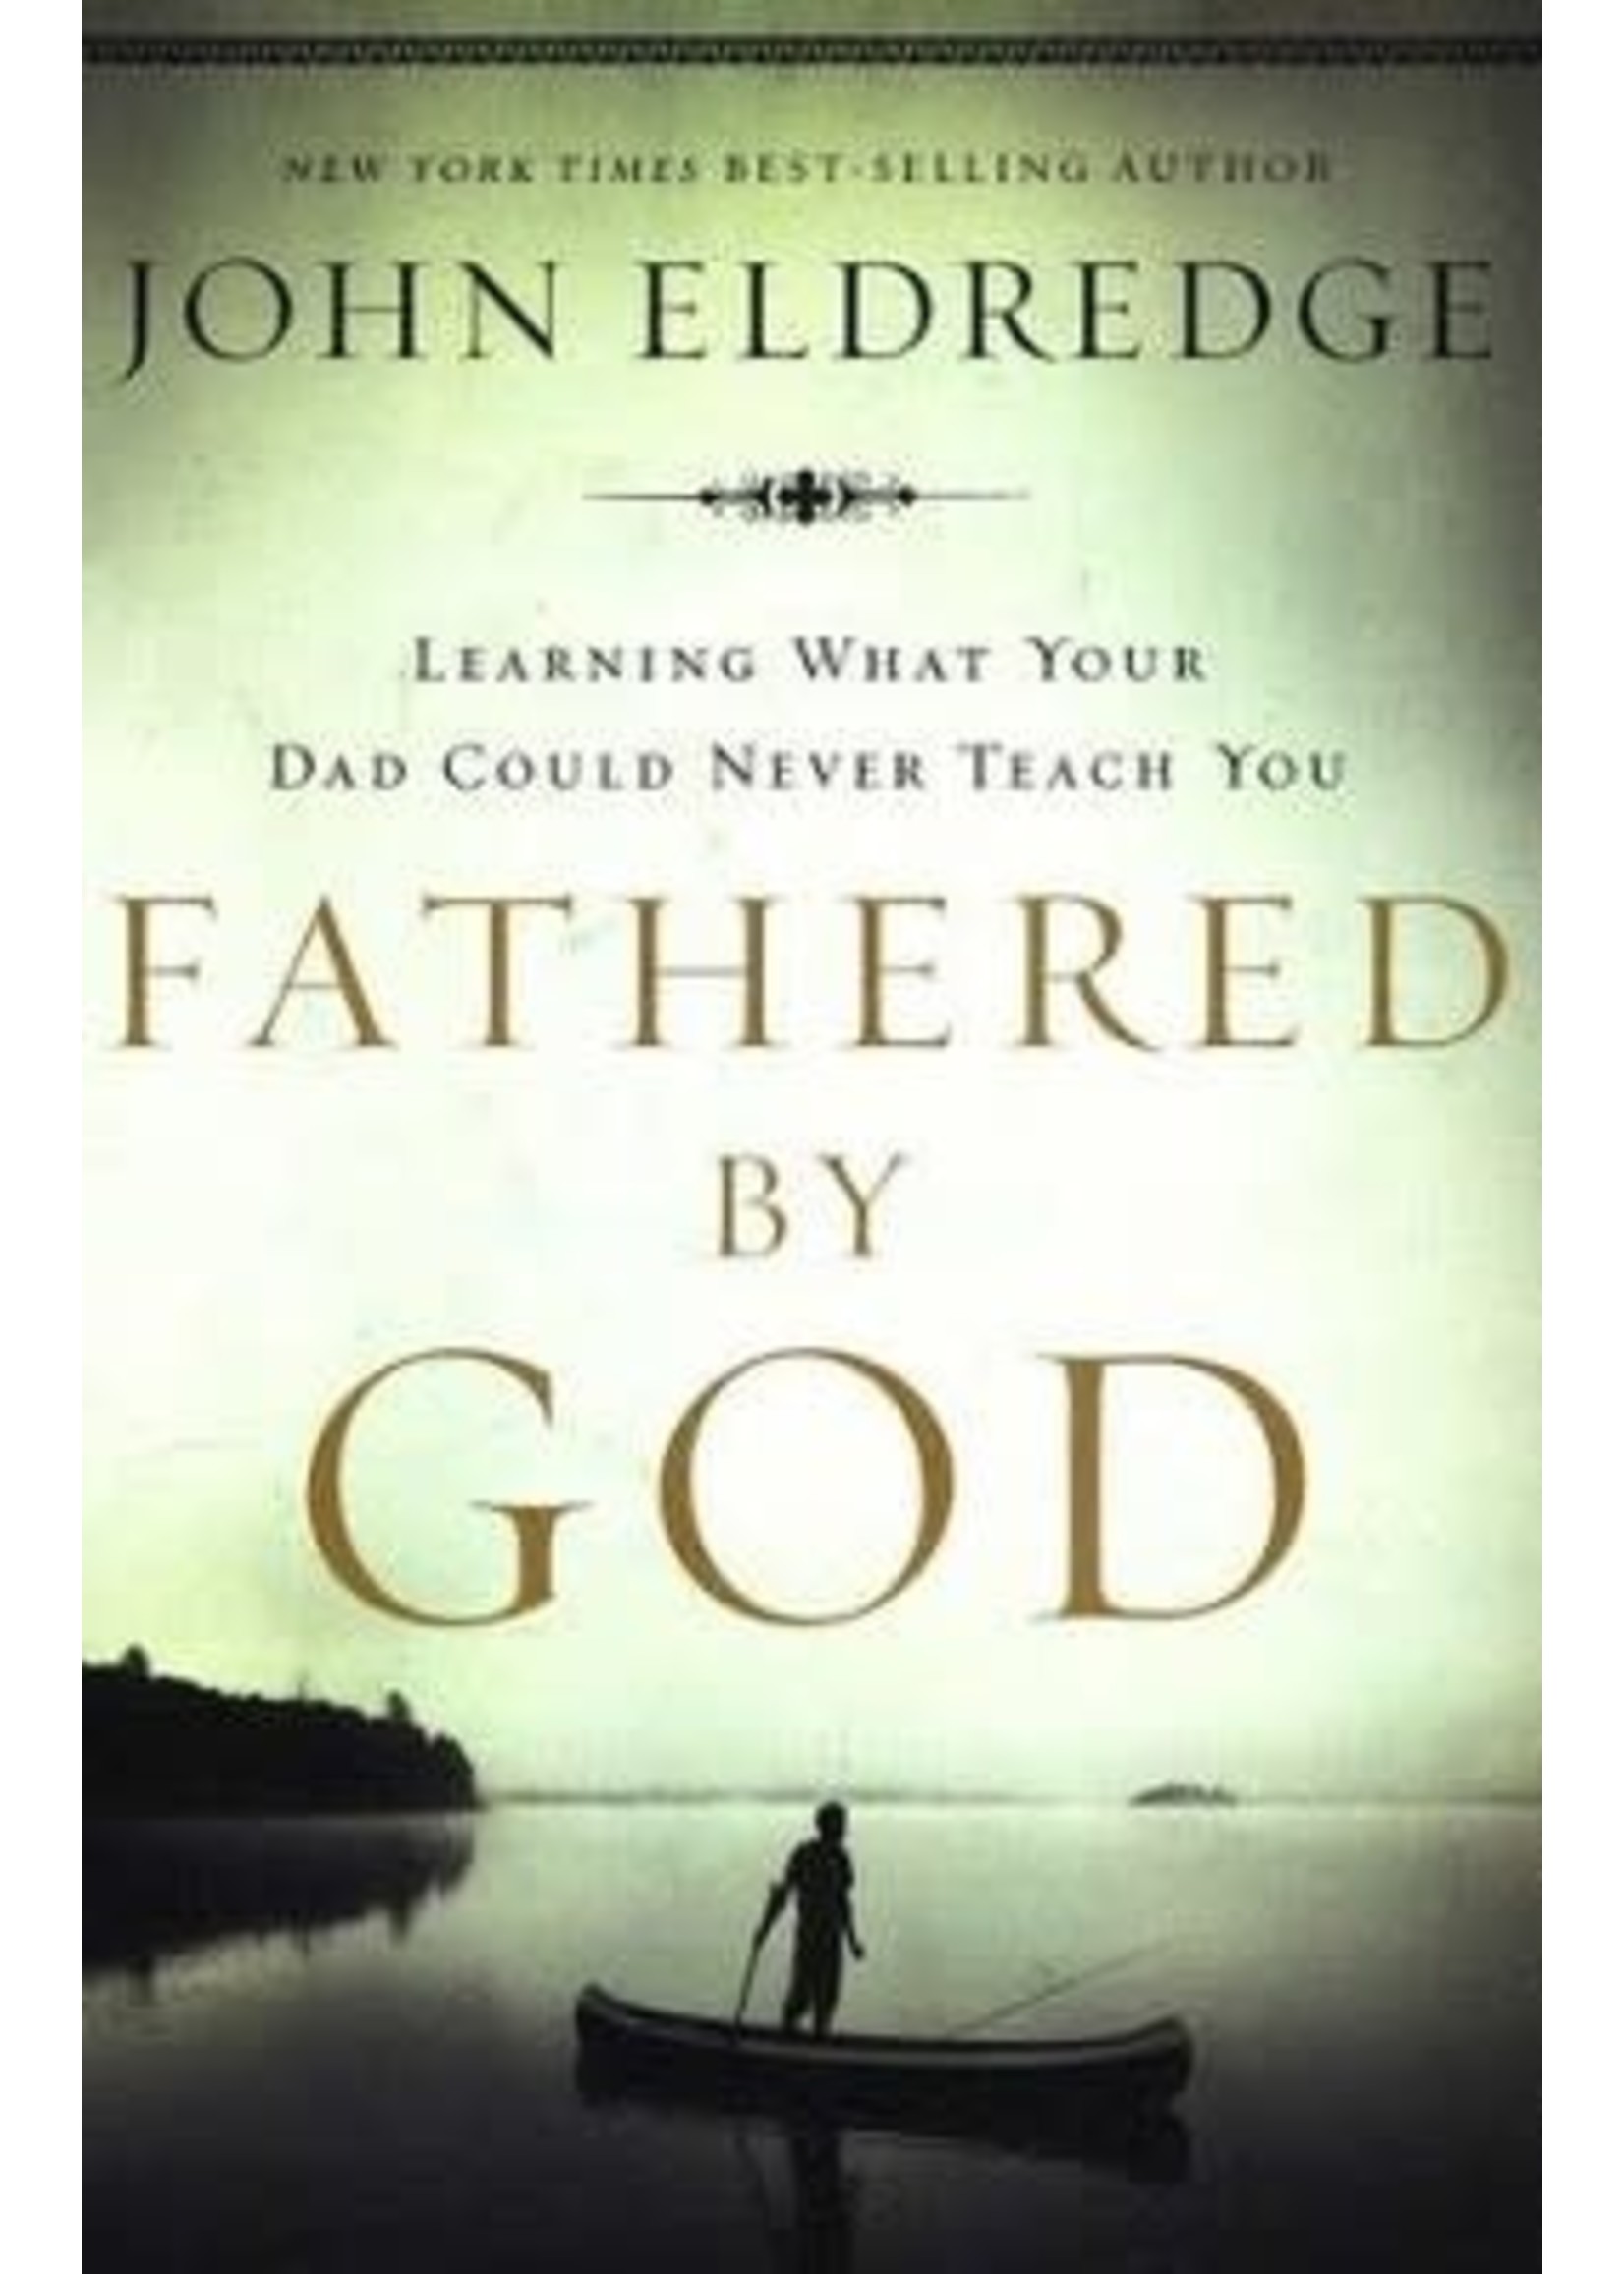 Fathered by God: Learning what your Dad Could Never Teach You